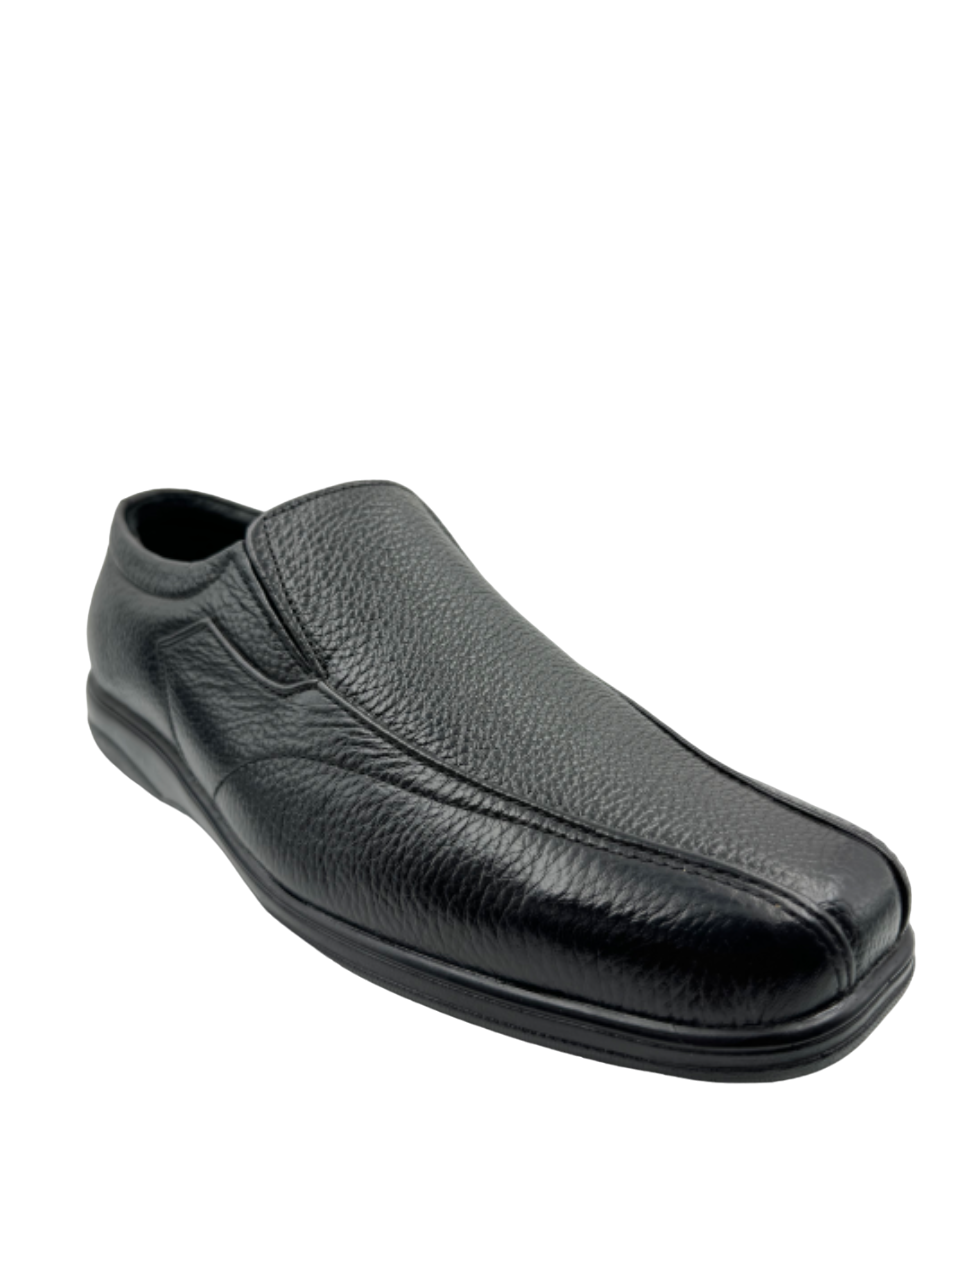 Ortho Soft Doctor Shoes GTSS 08